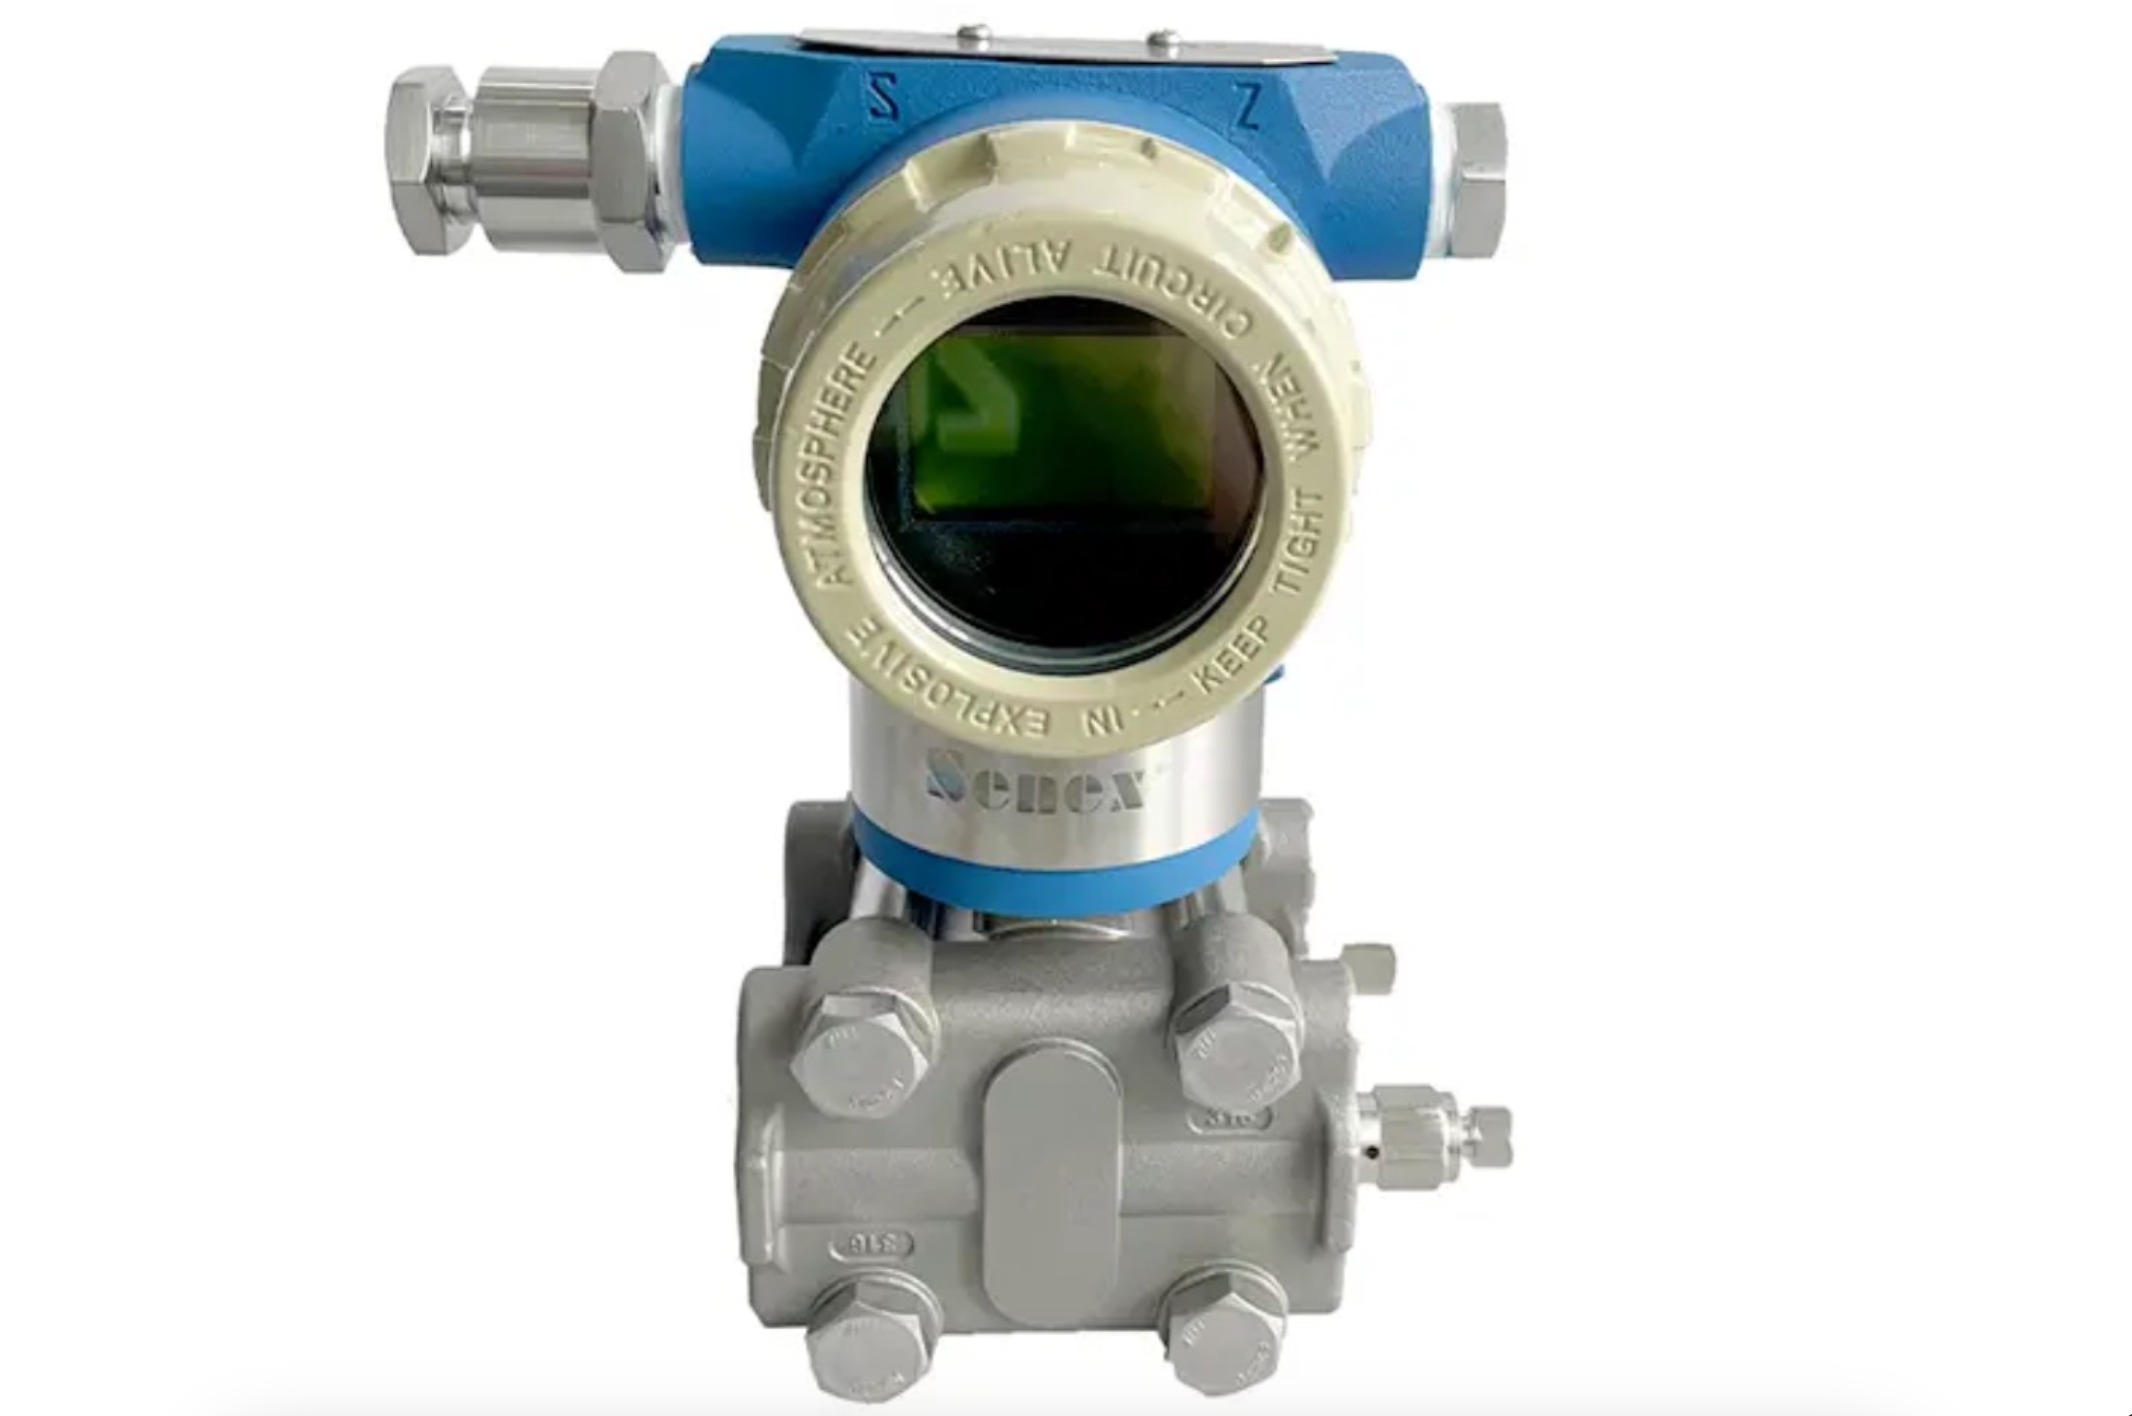 Differential pressure transmitter: the key to improve industrial production efficiency